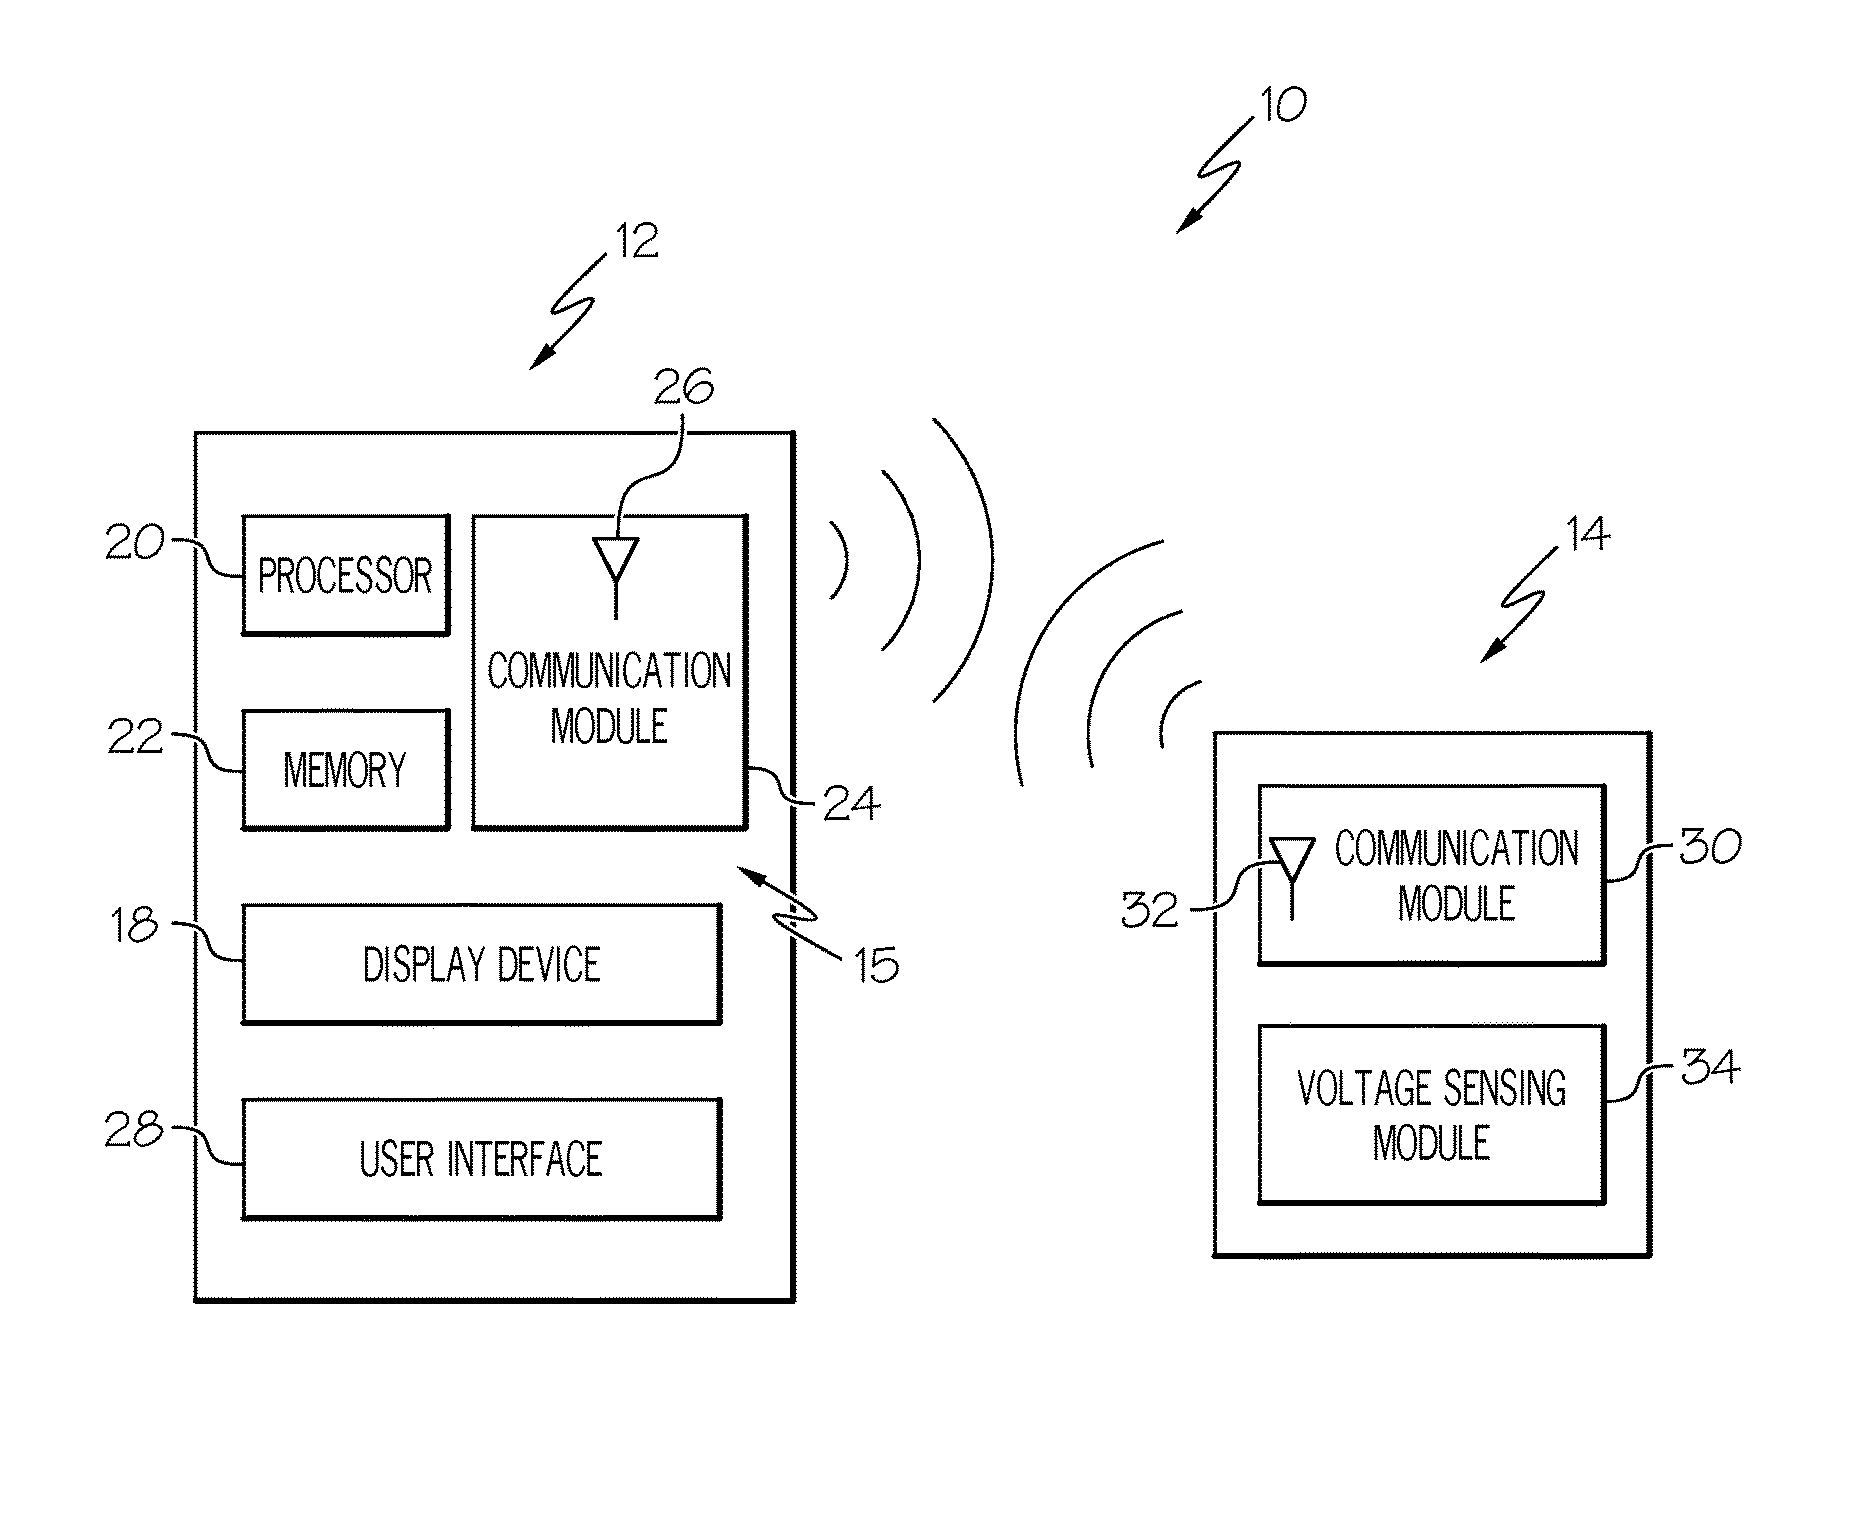 Remote sensing of remaining battery capacity using on-battery circuitry